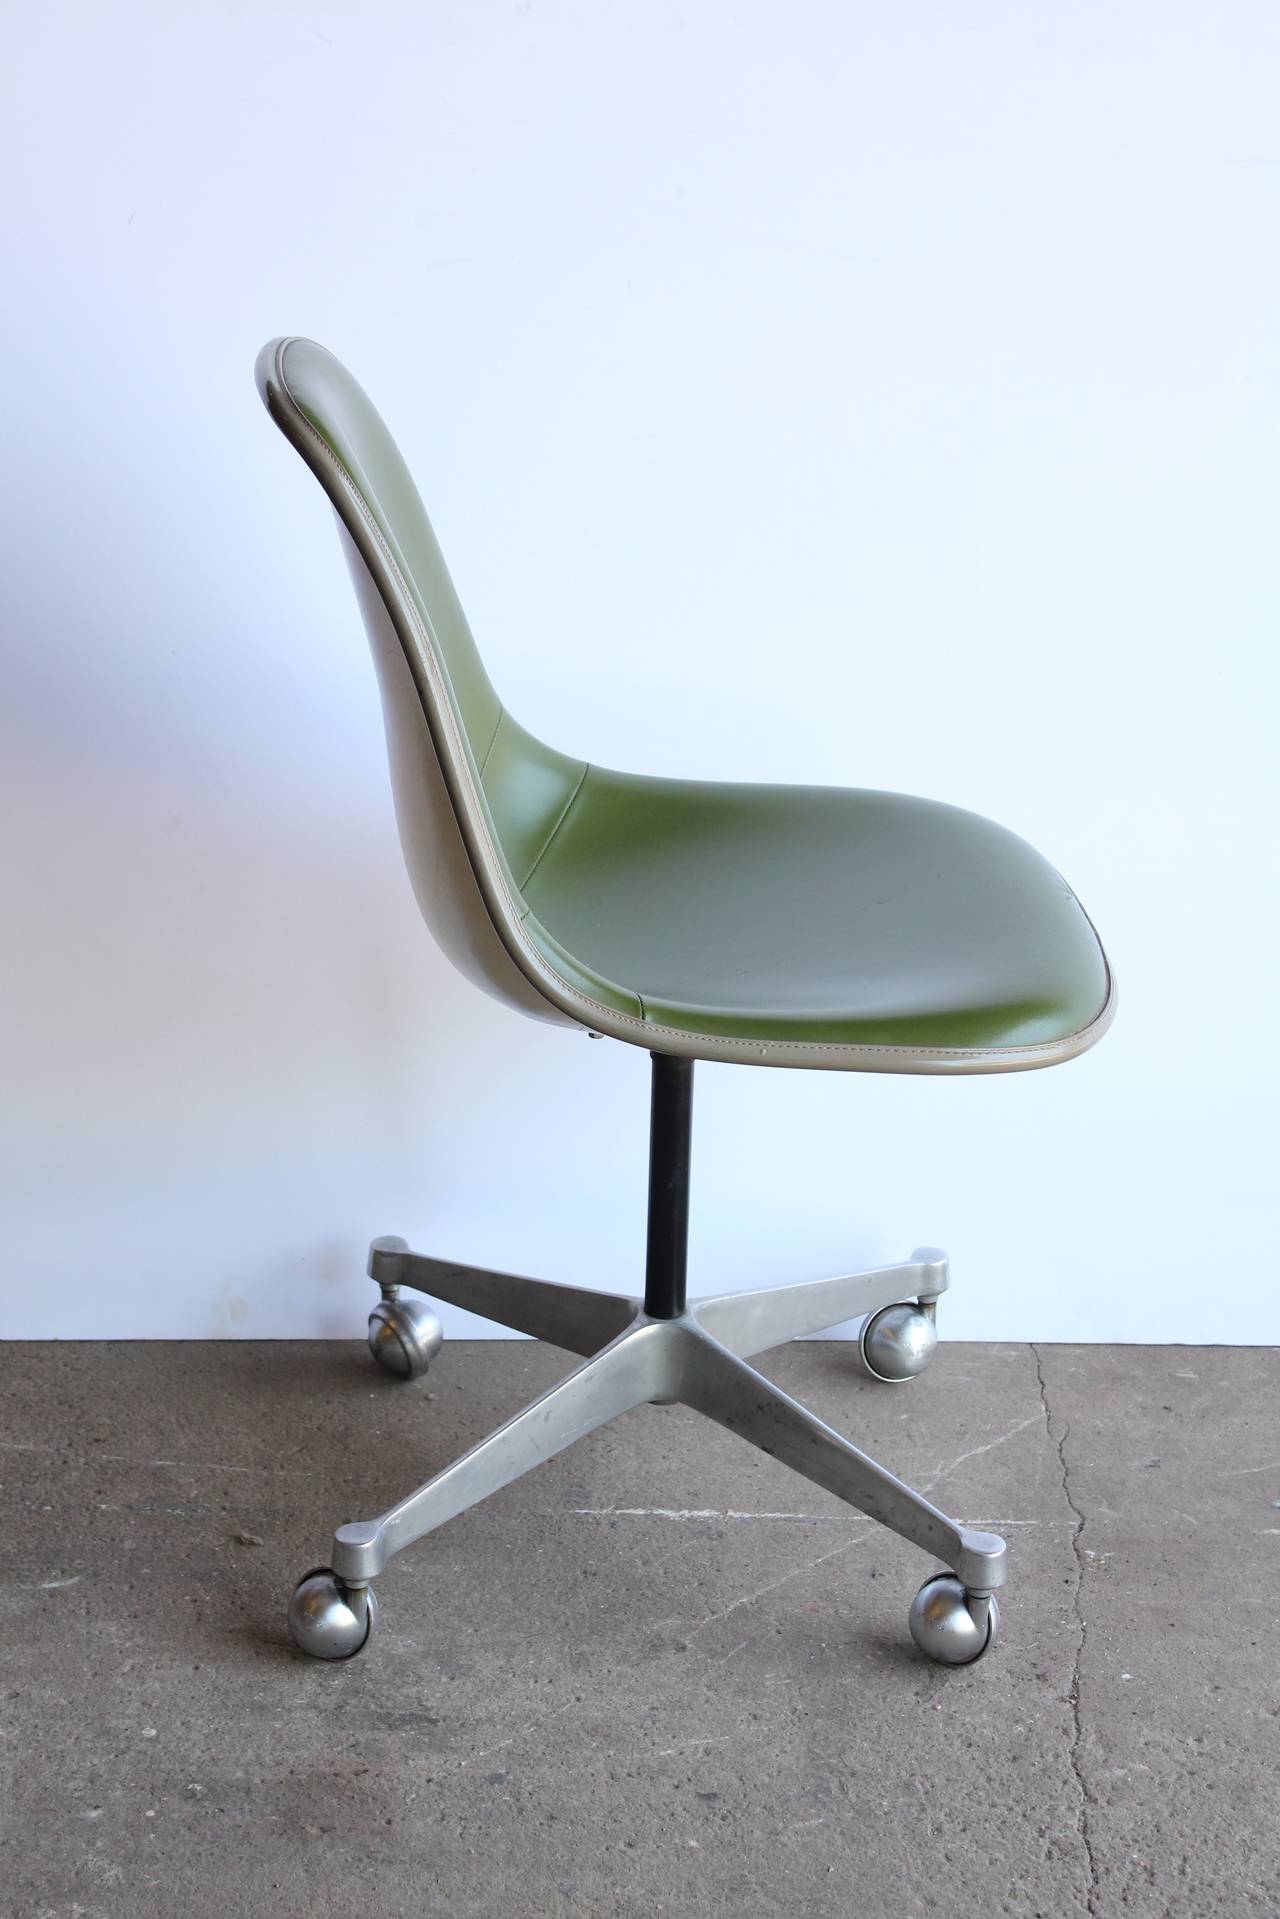 1960s Charles Eames swivel desk chair for Herman Miller. We have two available. Listed price is for one chair.